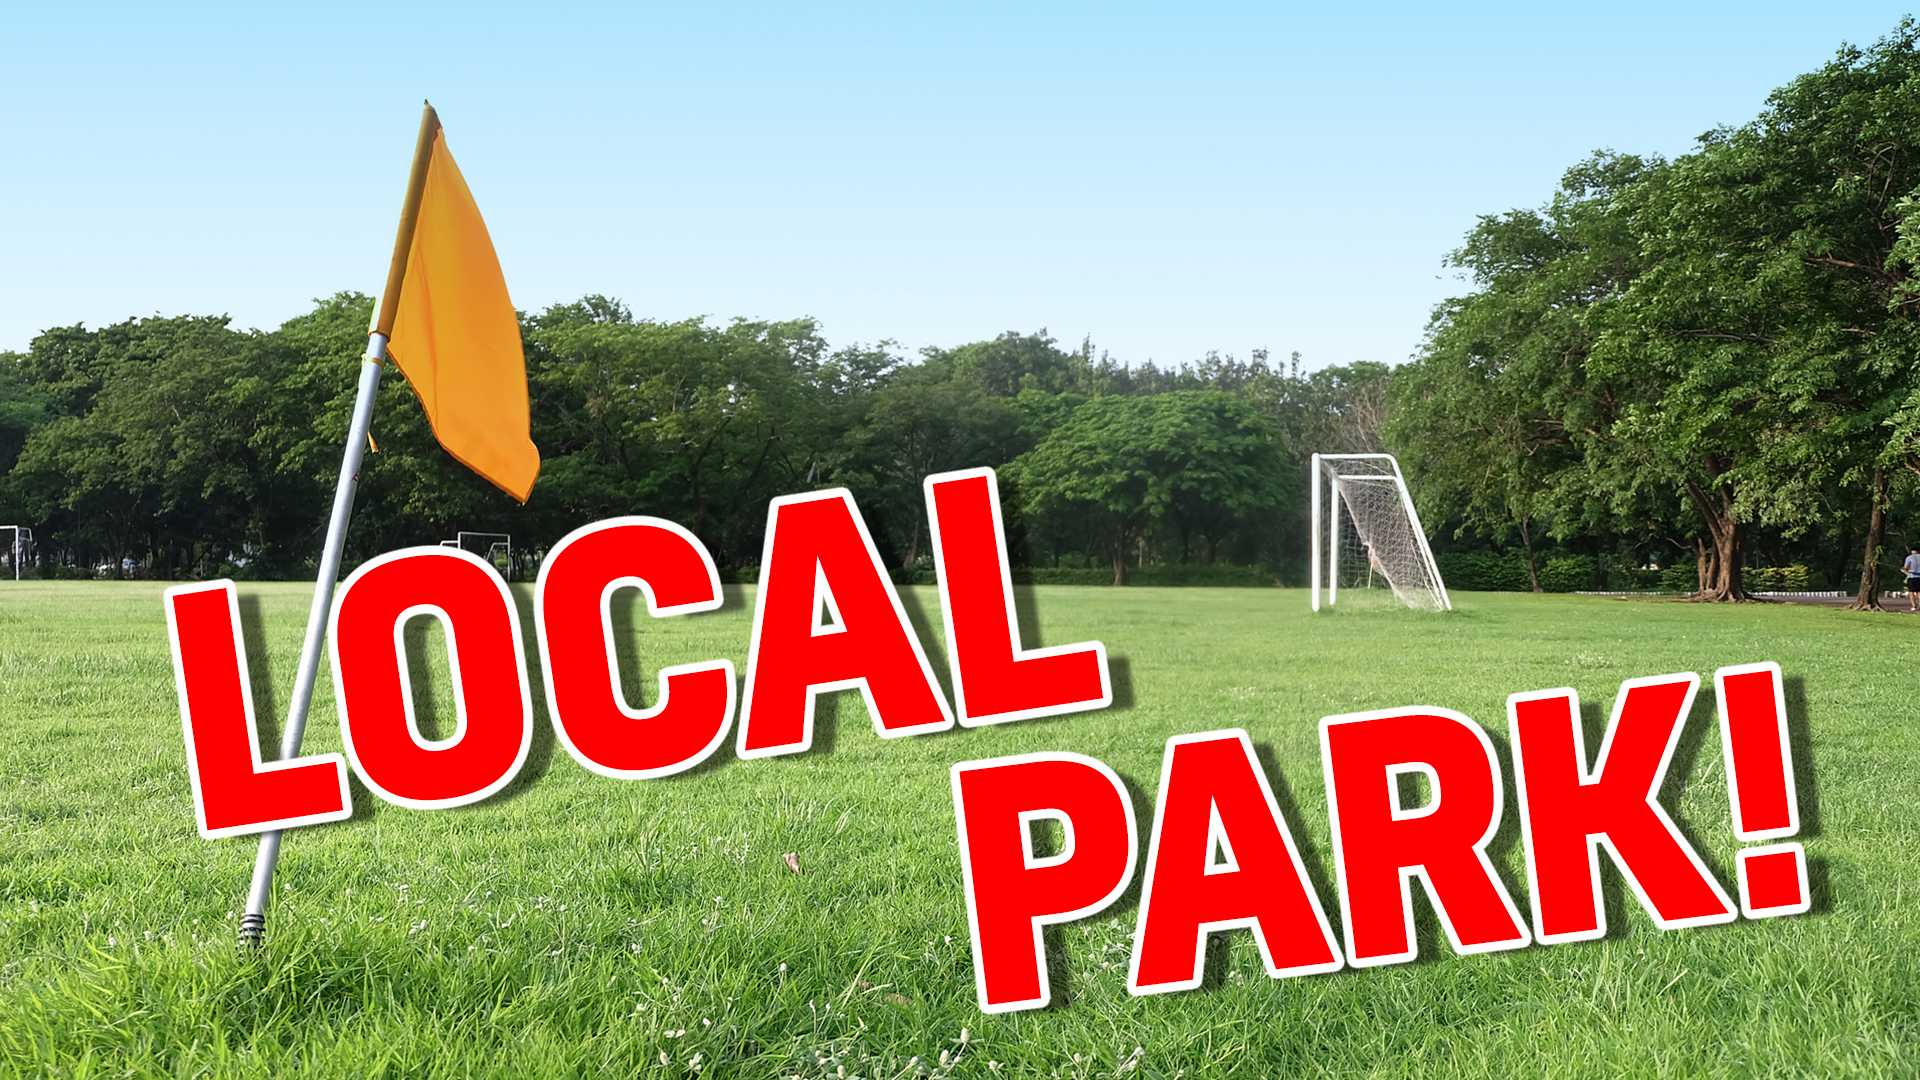 Your team will play in a: LOCAL PARK!